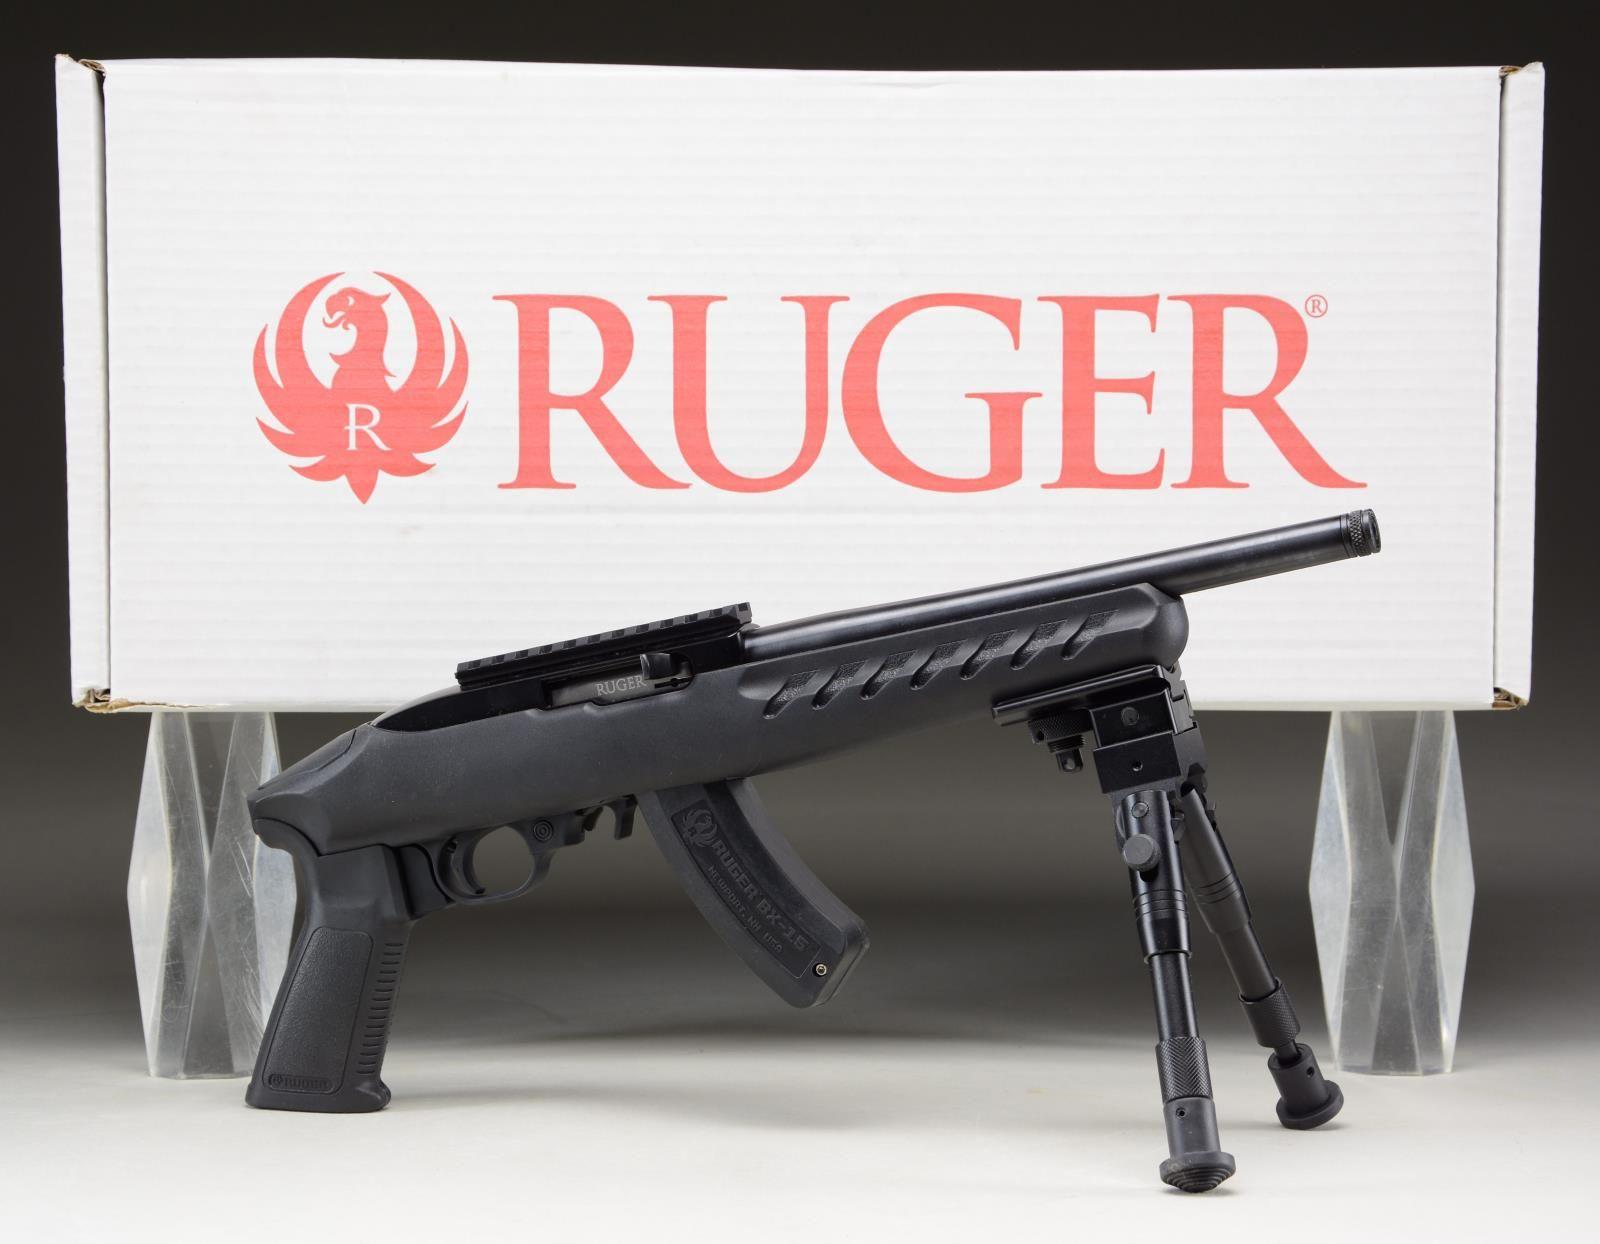 RUGER 22 CHARGER SEMI-AUTO PISTOL.